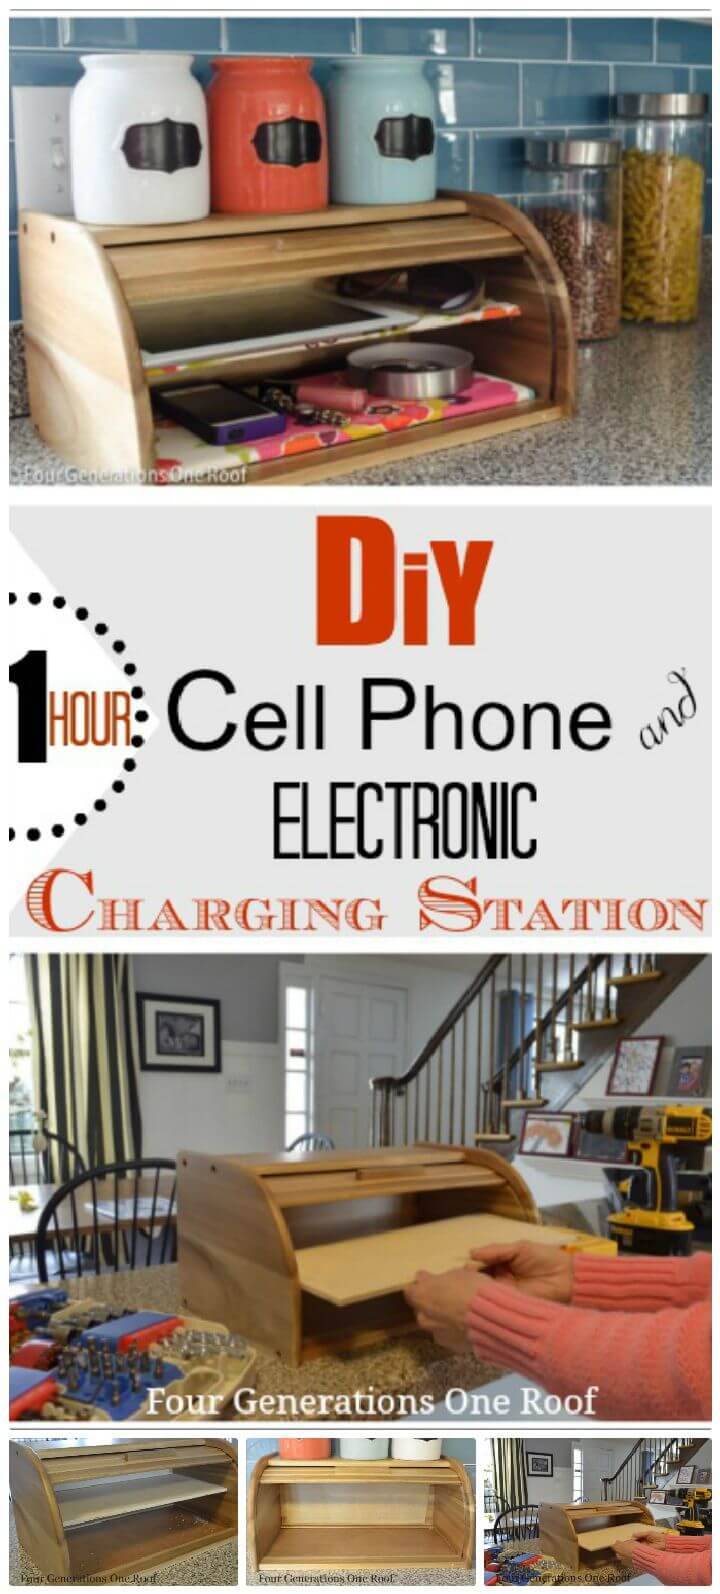 DIY Cell Phone Charging Station Tutorial